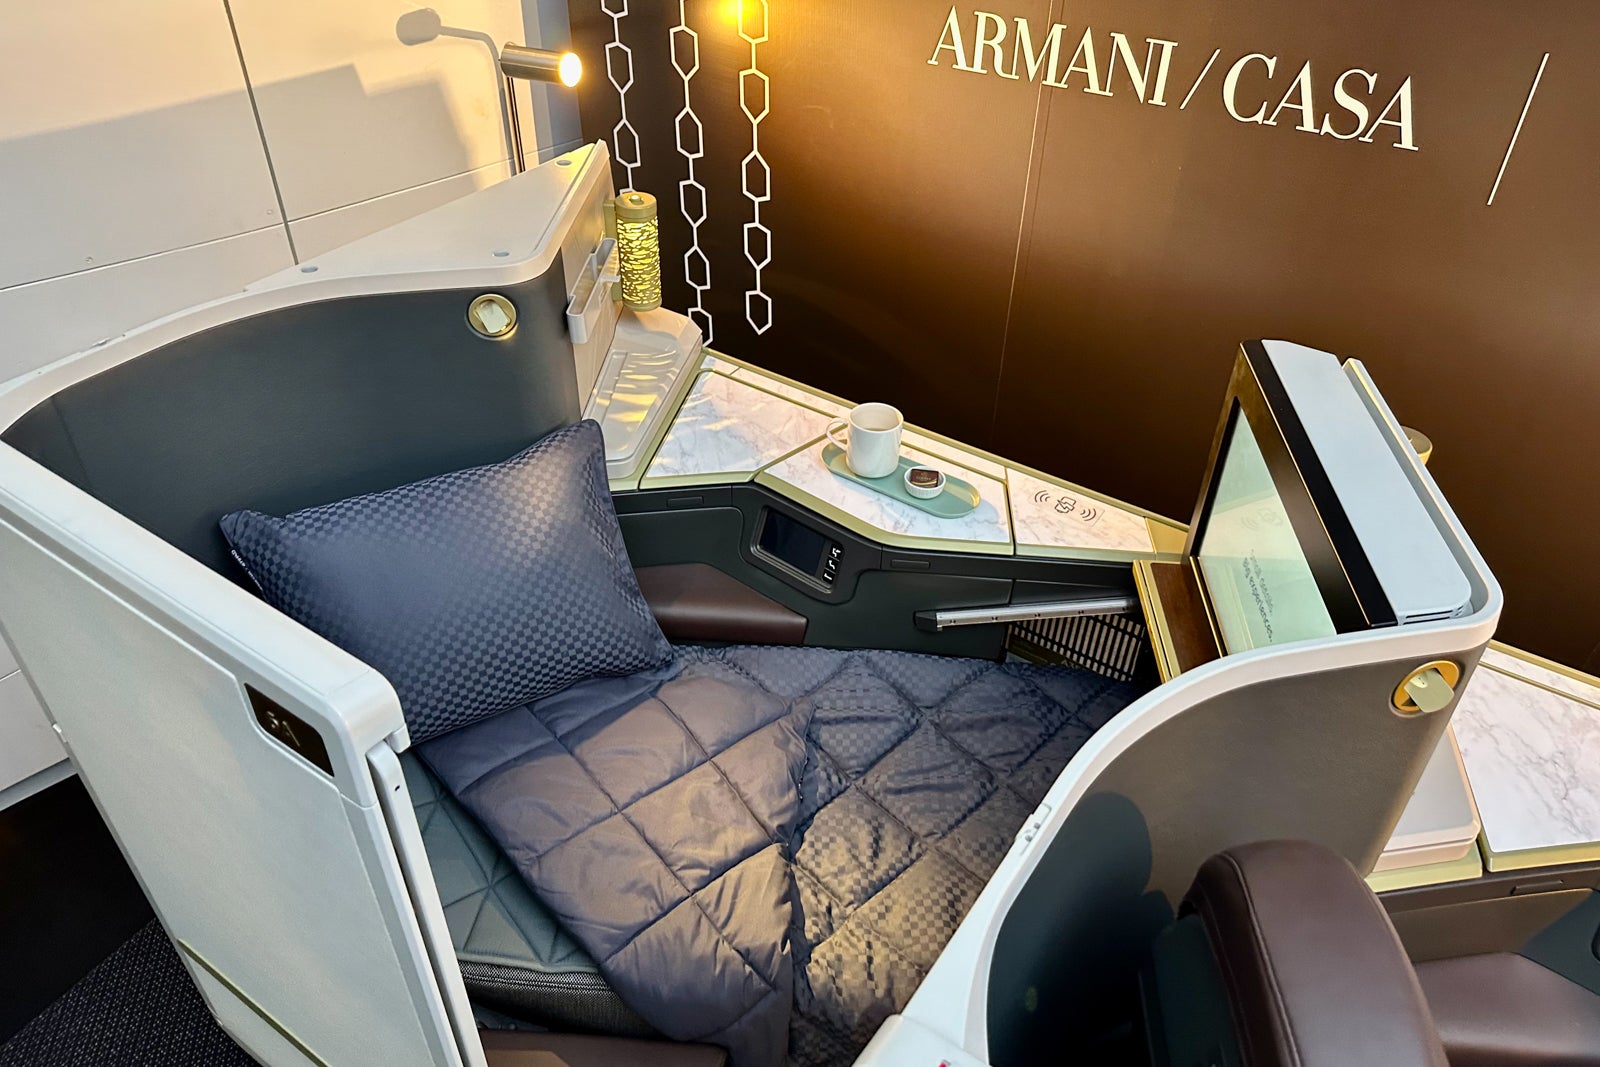 lie-flat bed with Armani logo